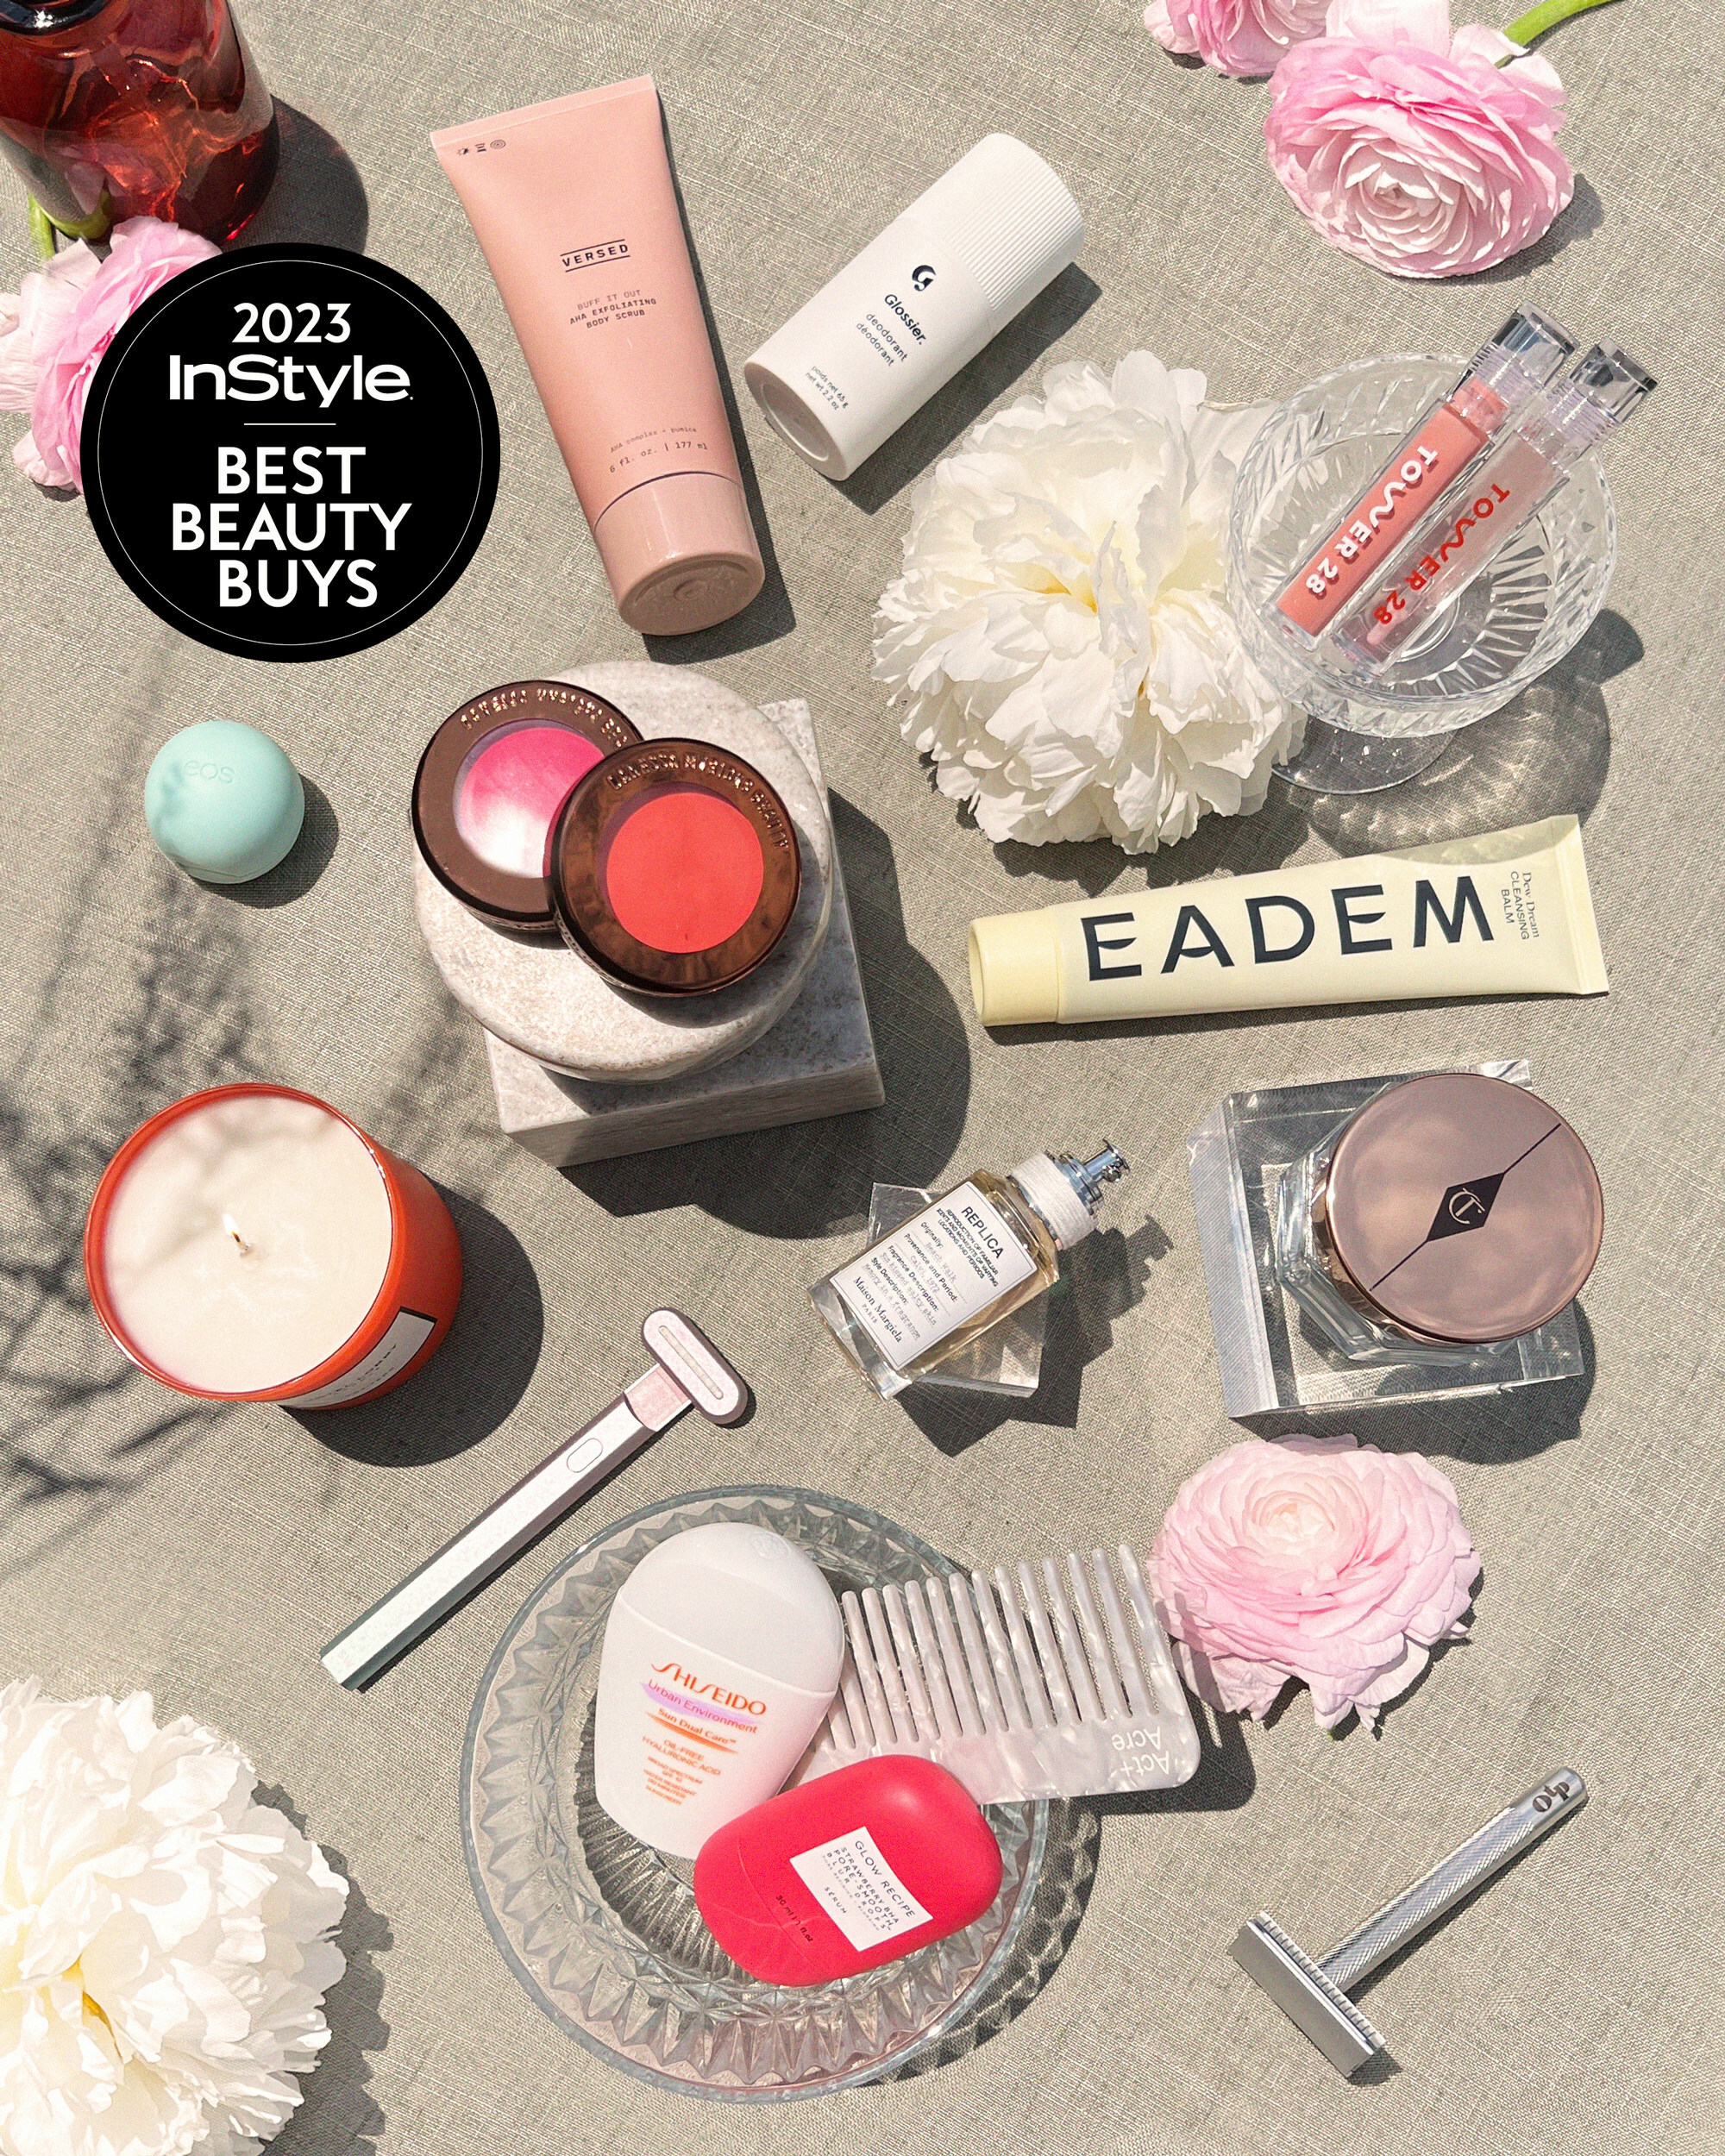 INSTYLE ANNOUNCES 2023 BEST BEAUTY BUYS - Jun 20, 2023